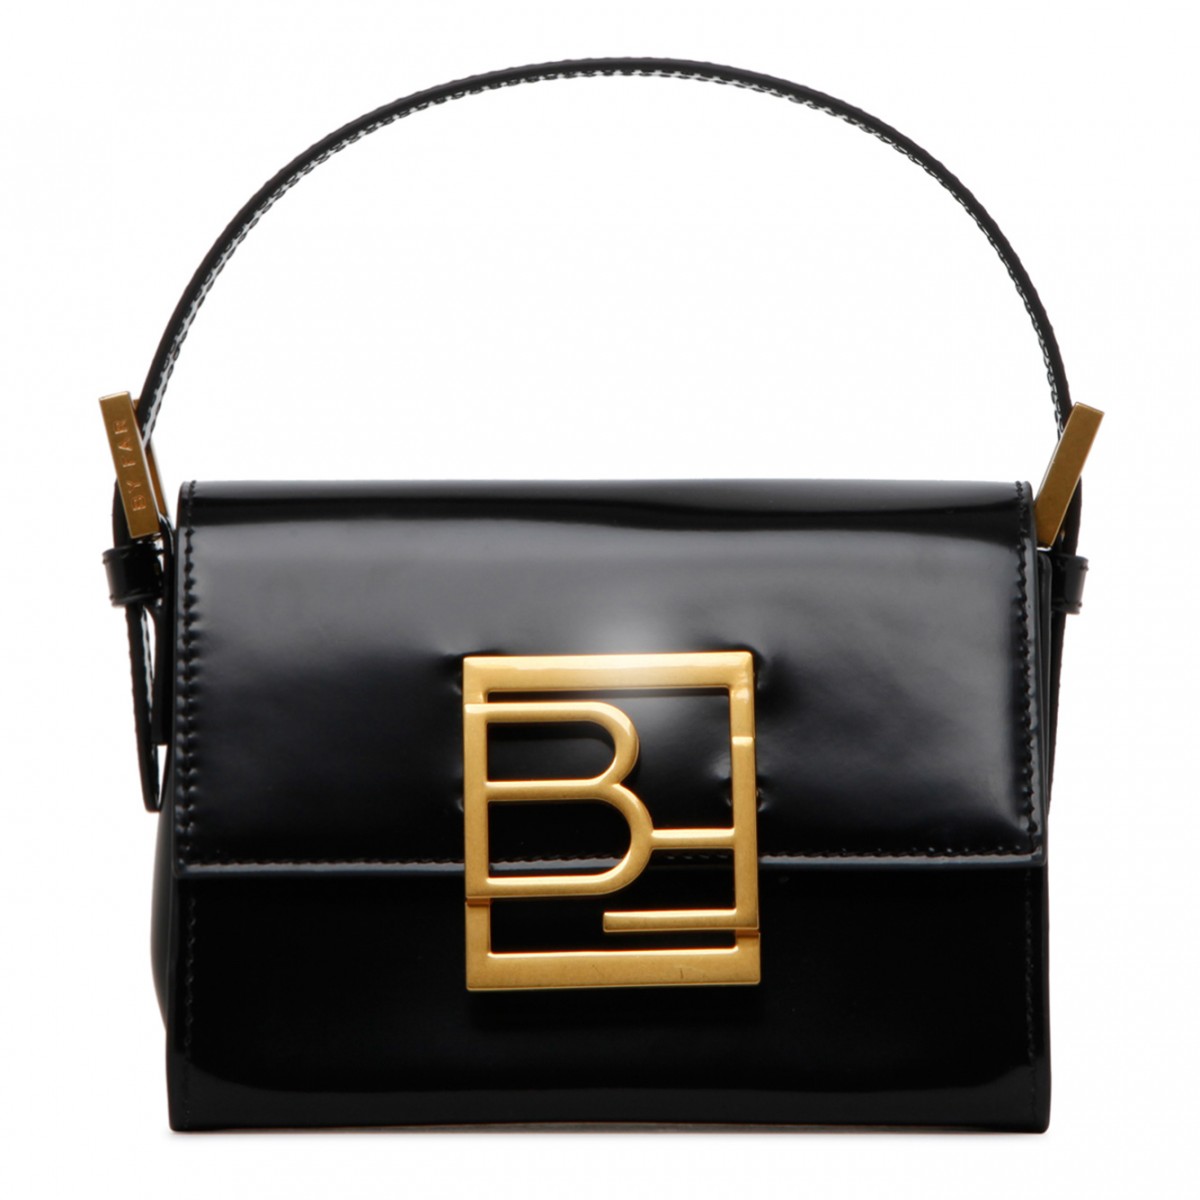 by Far - Black Patent Leather Fran Logo Plaque Tote Bag